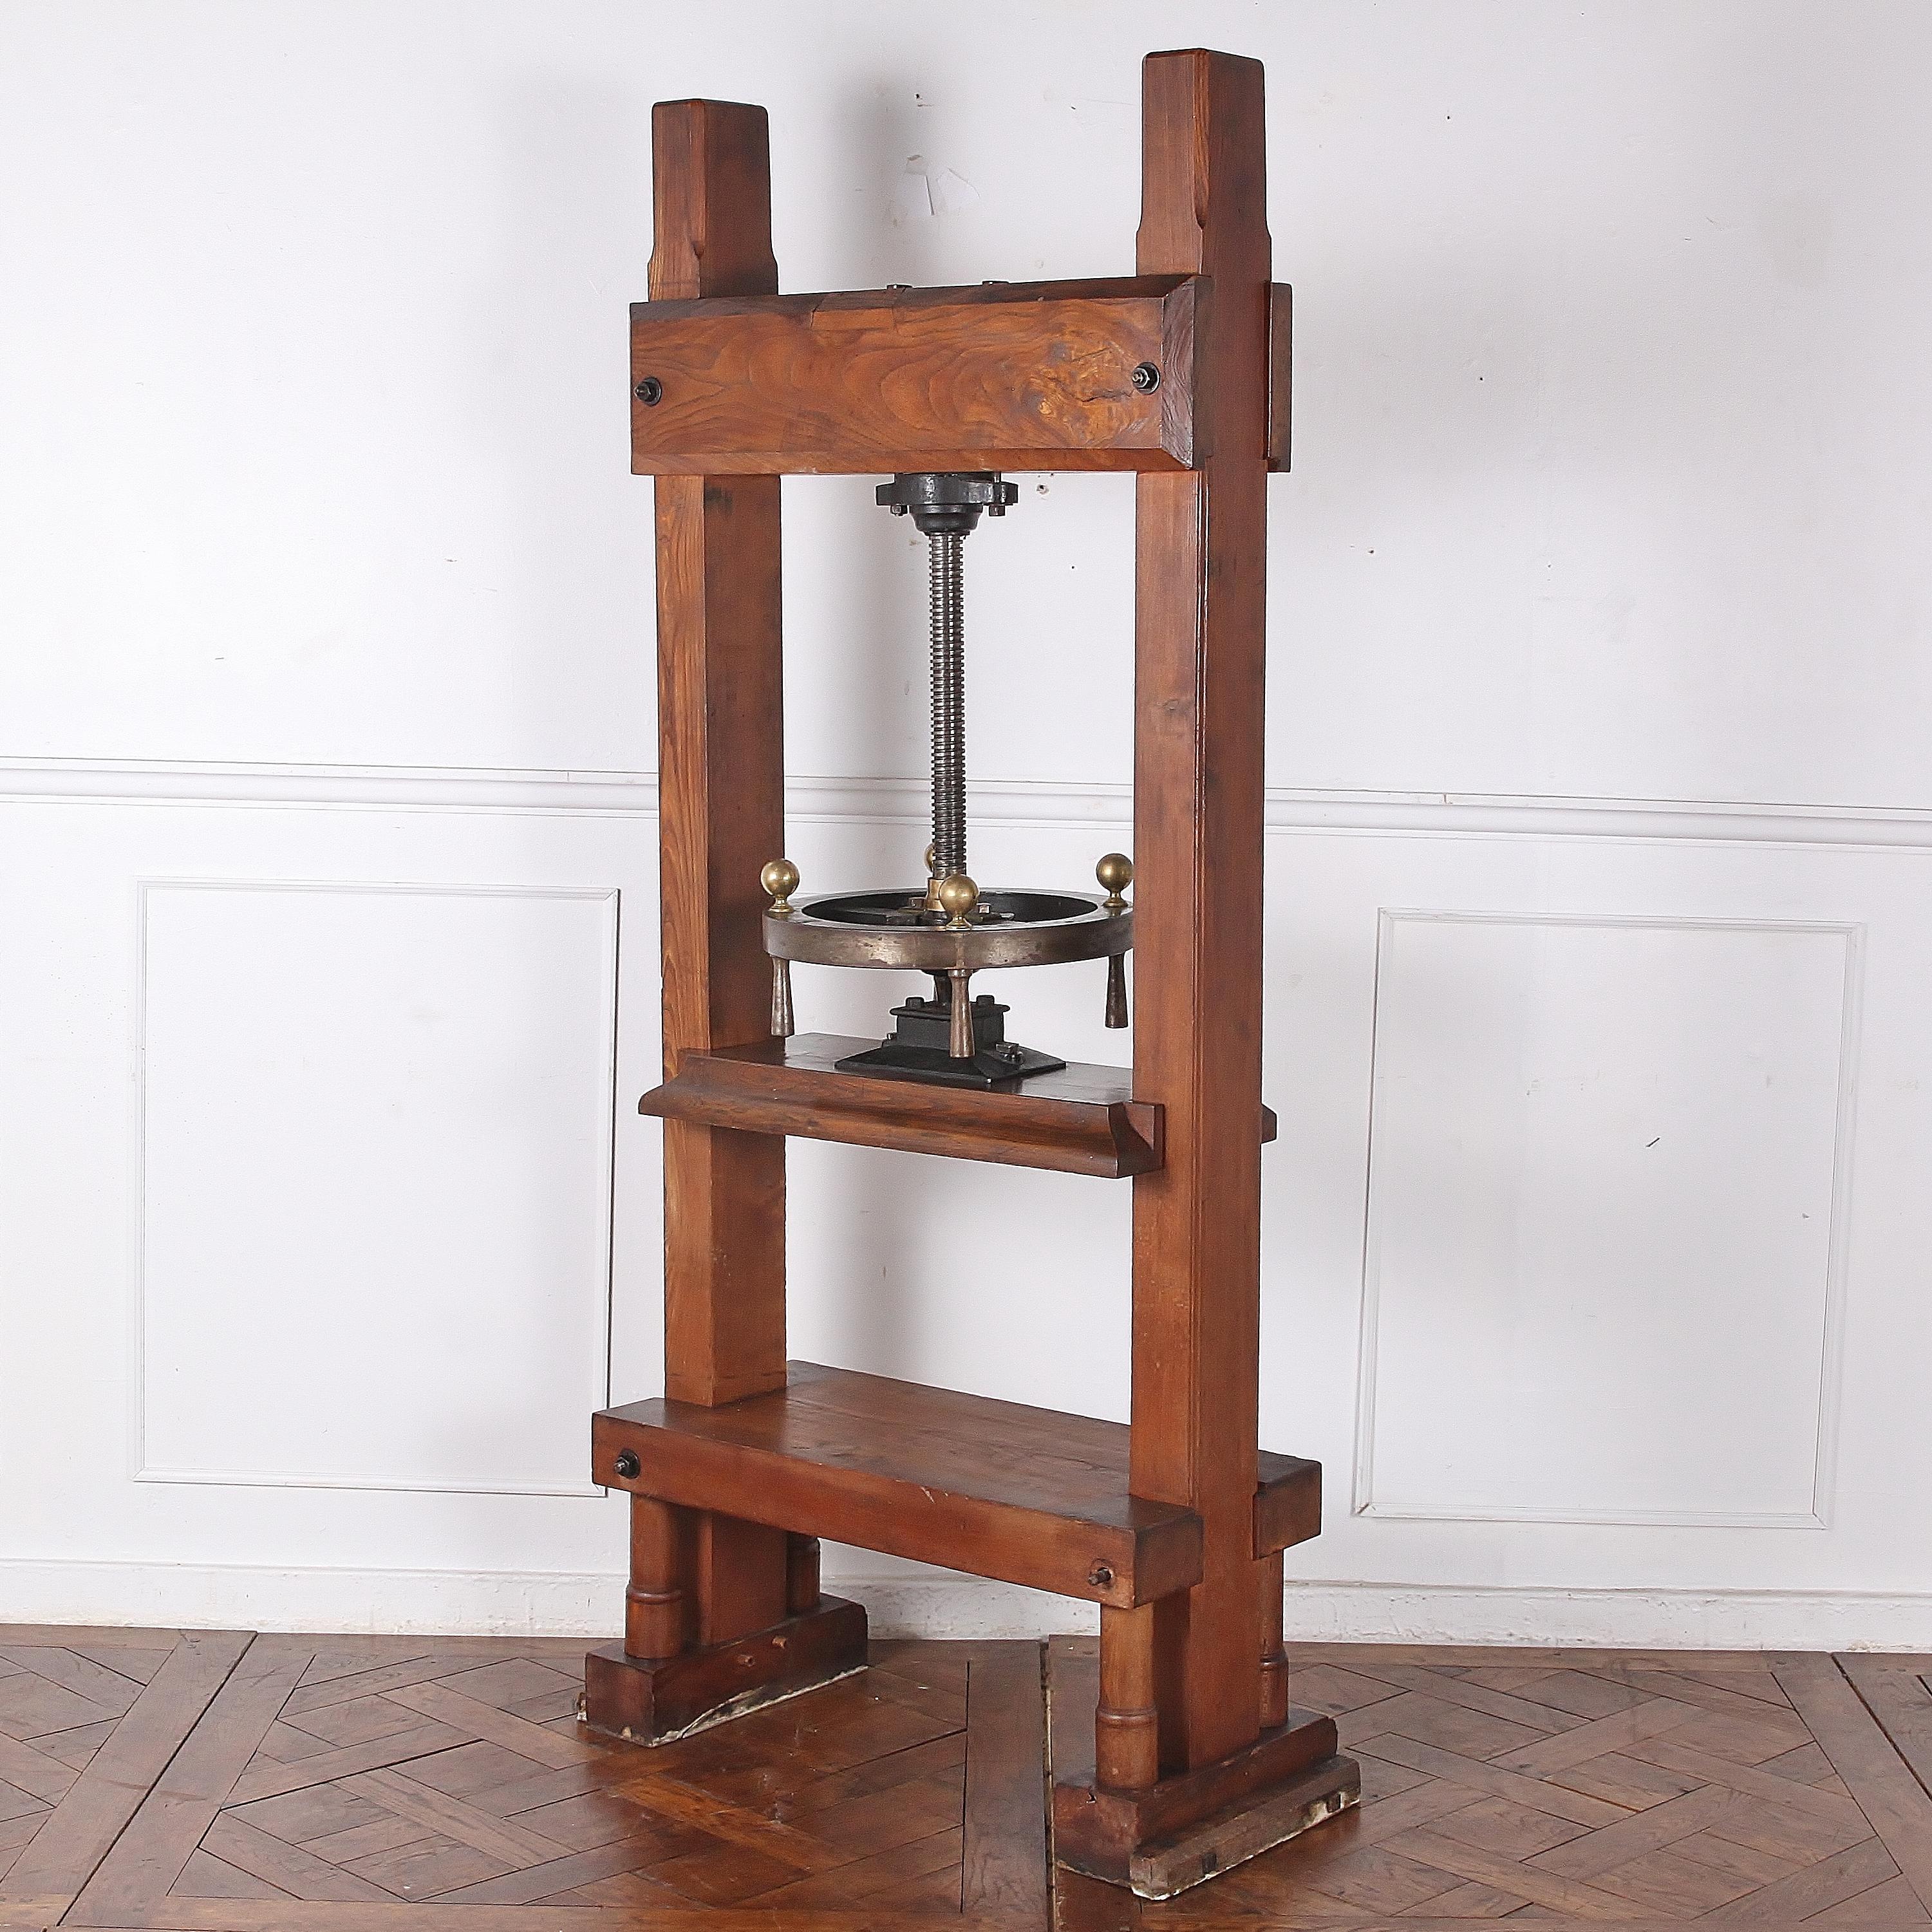 A 19th century French book press, the heavy steel screw / press mechanism suspended within a stout chestnut-wood frame. The chestnut timber has some lovely figuring and a warm patina and the fully-functional mechanism has a sculptural quality to the